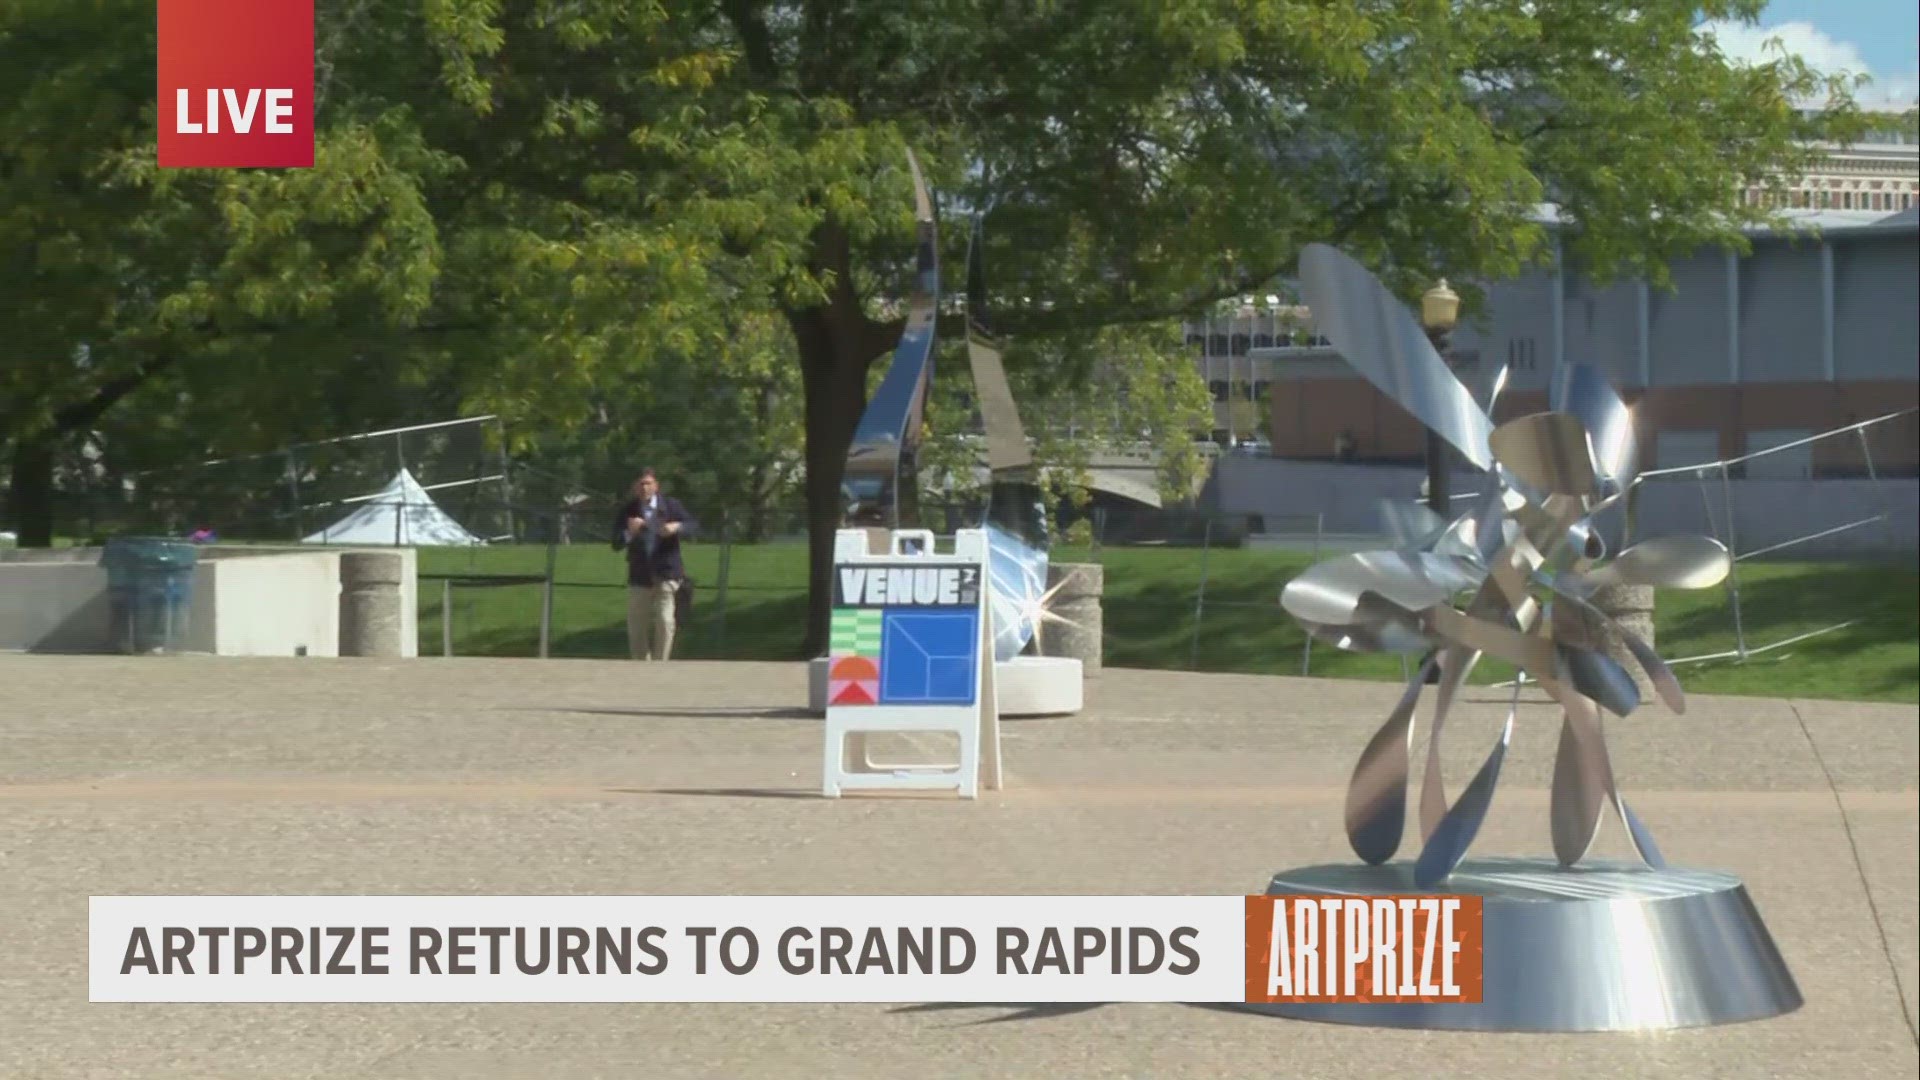 The festival brings thousands of visitors to Grand Rapids to see artwork from around the globe.